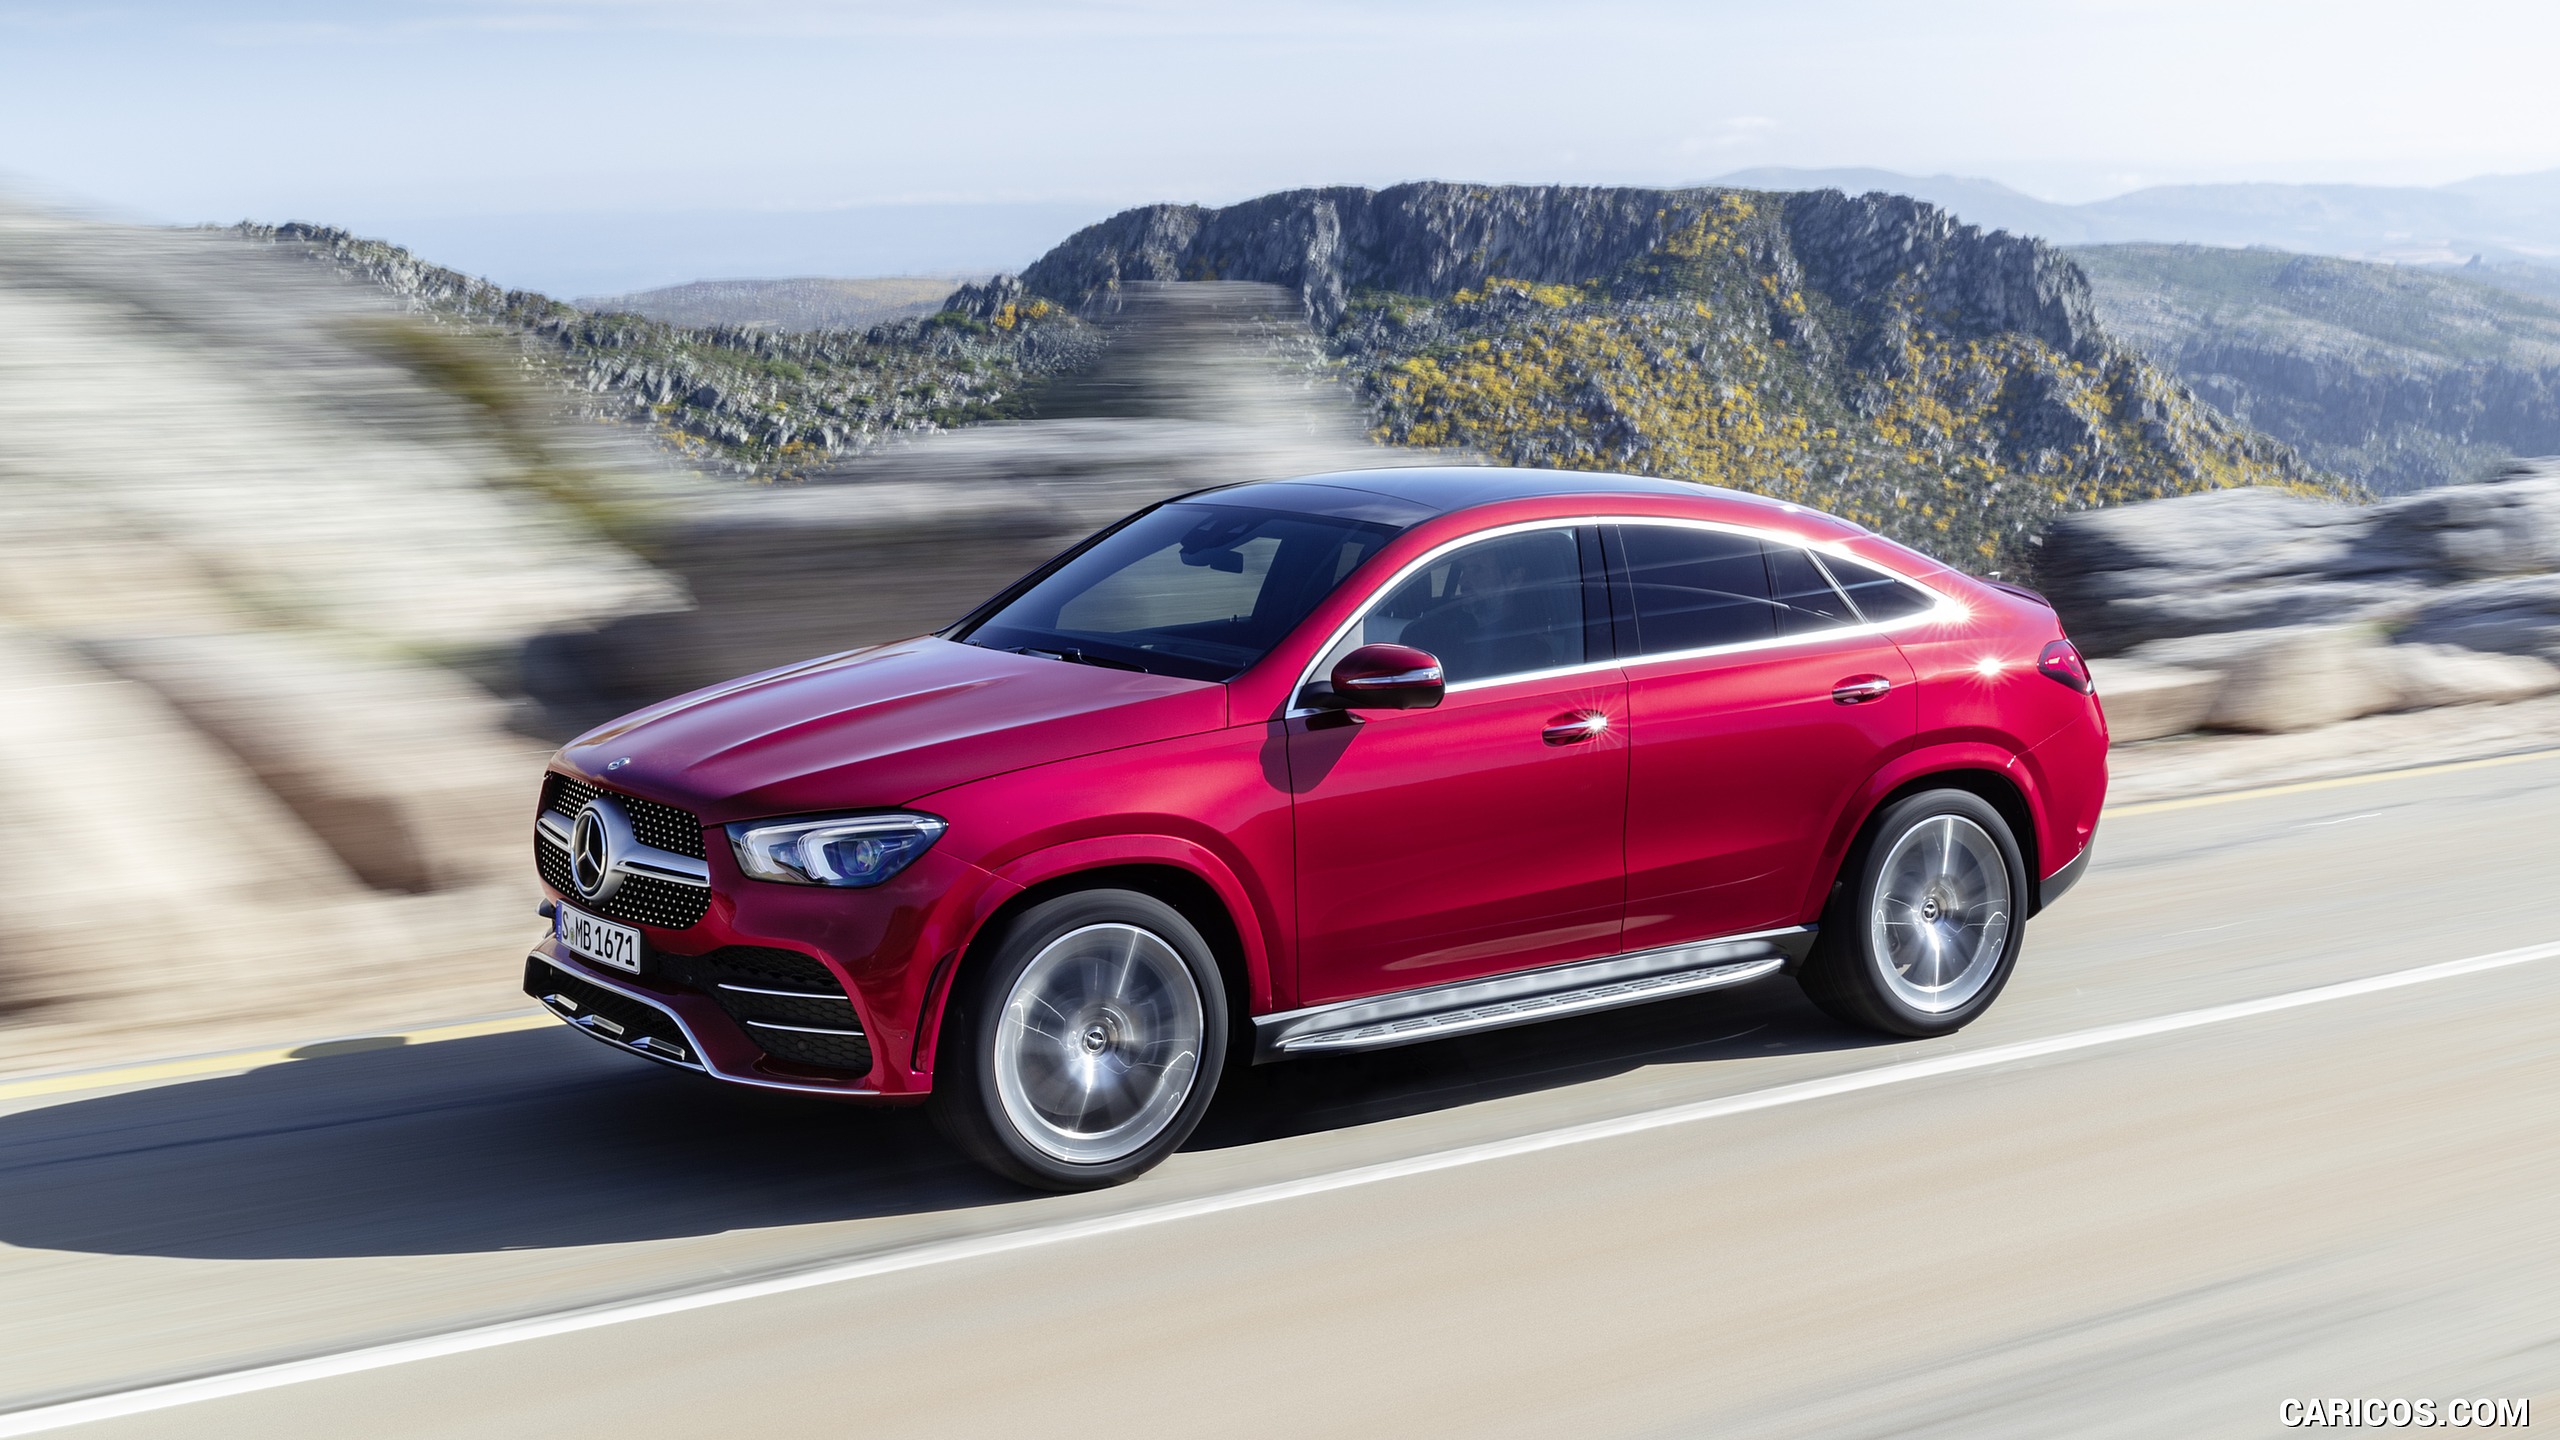 2021 Mercedes-Benz GLE Coupe (Color: Designo Hyacinth Red Metallic) - Front Three-Quarter, #5 of 62